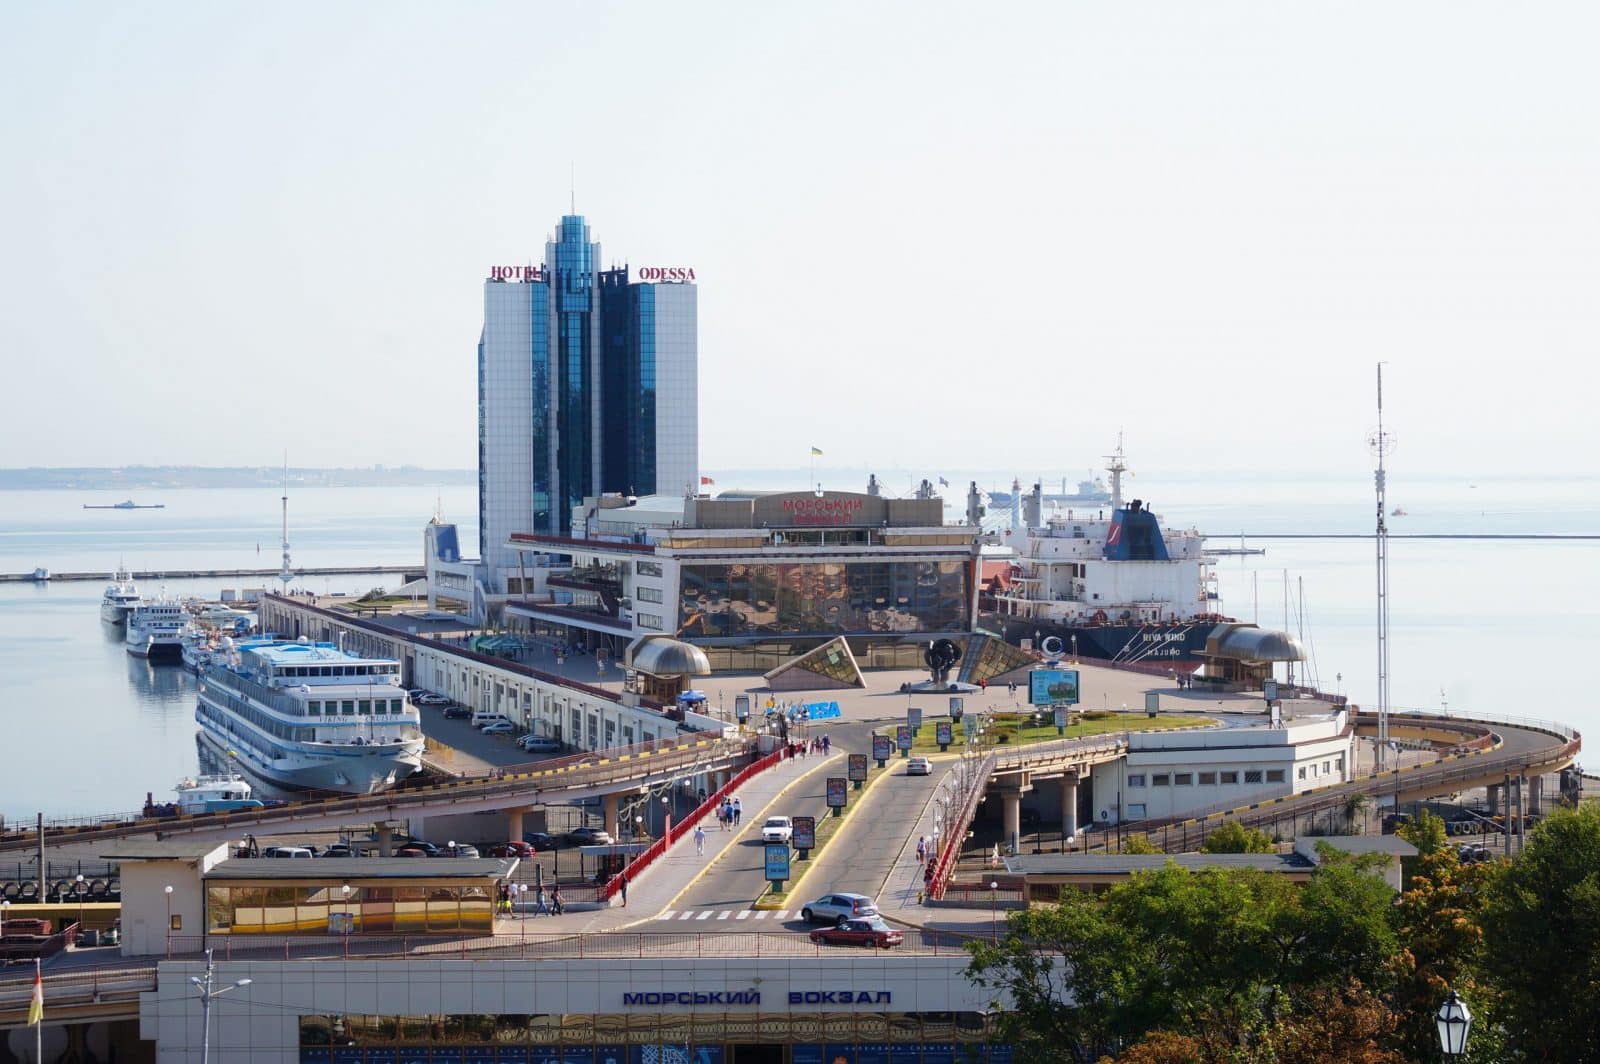 The Russians attacked the Odesa sea trade port with Kalibr cruise missiles after the agreement on the export of grain from this port